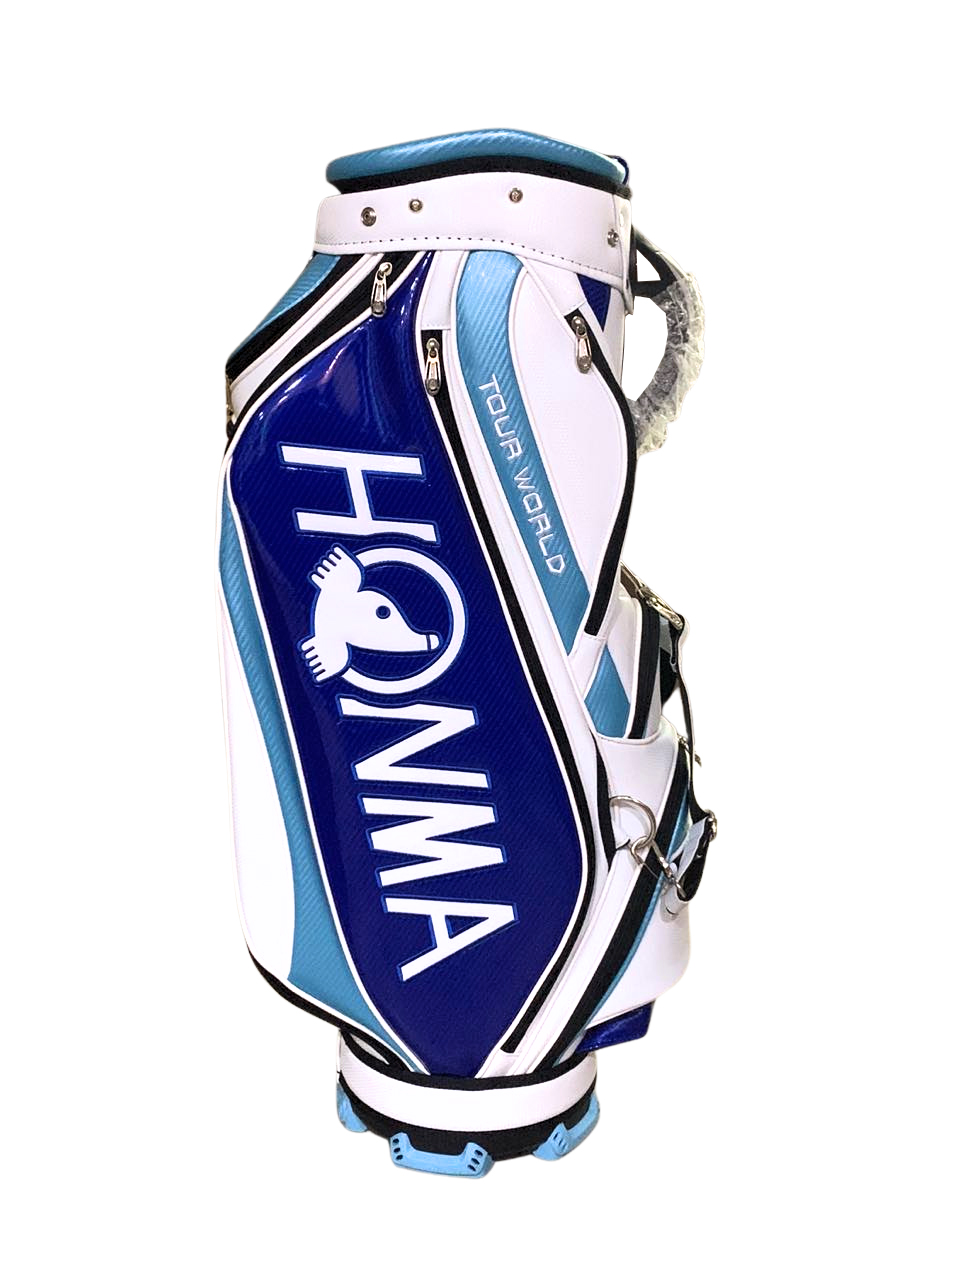 HONMA Golf Bag with Top Cover Water-Proof PU Leather Finish